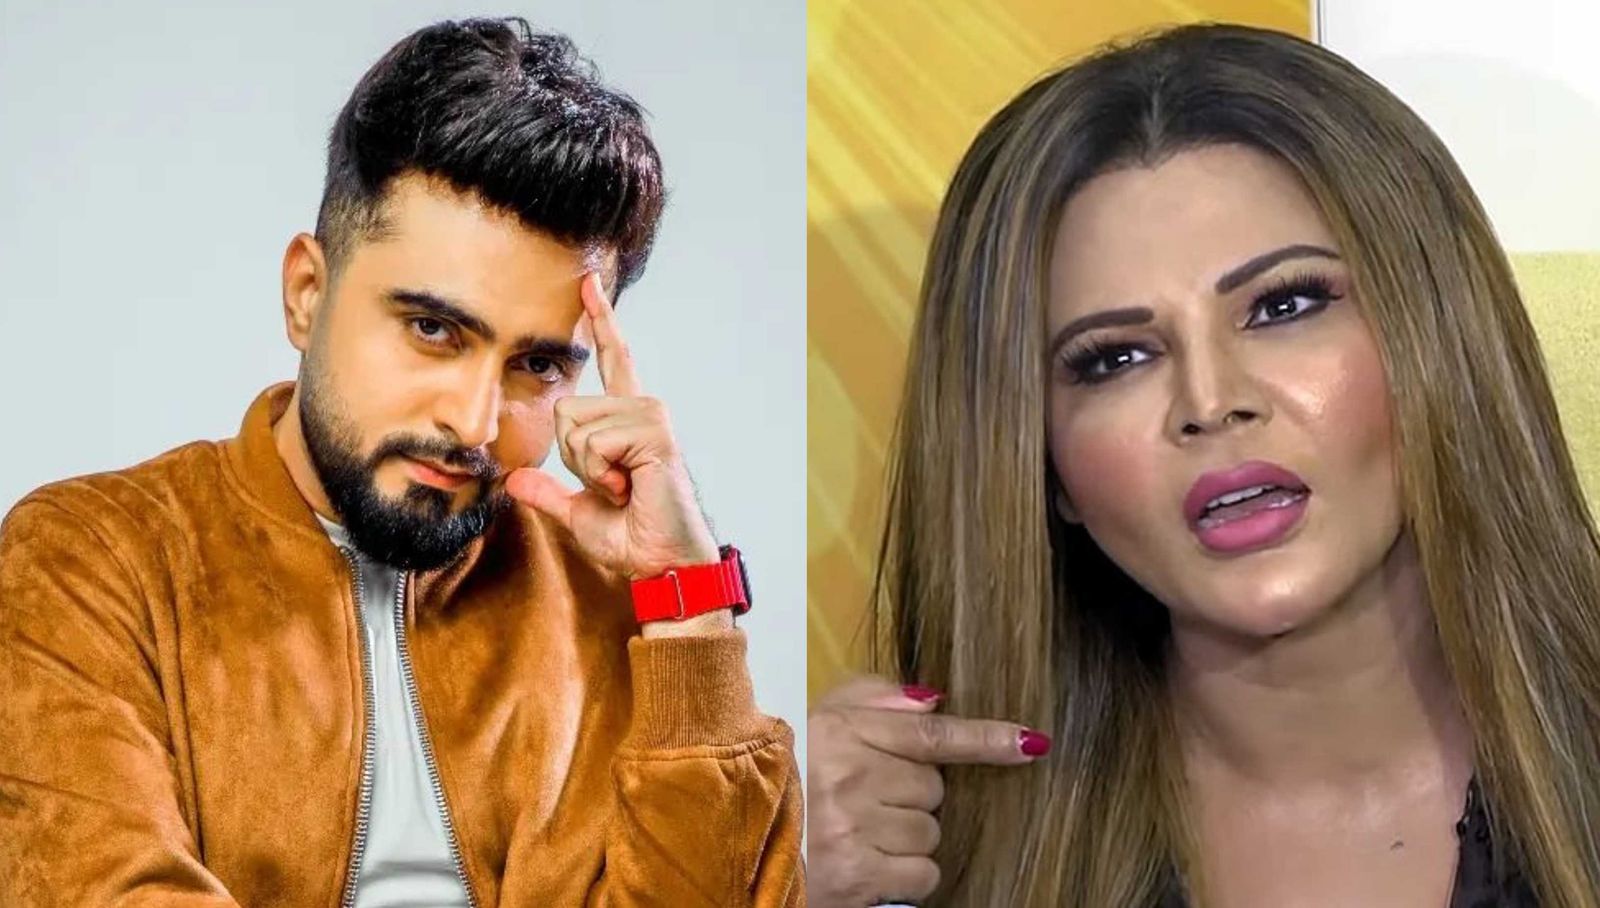 Rakhi Sawant’s BF Adil Durrani reveals he has bagged a Hollywood film while she is busy with Bigg Boss Marathi 4